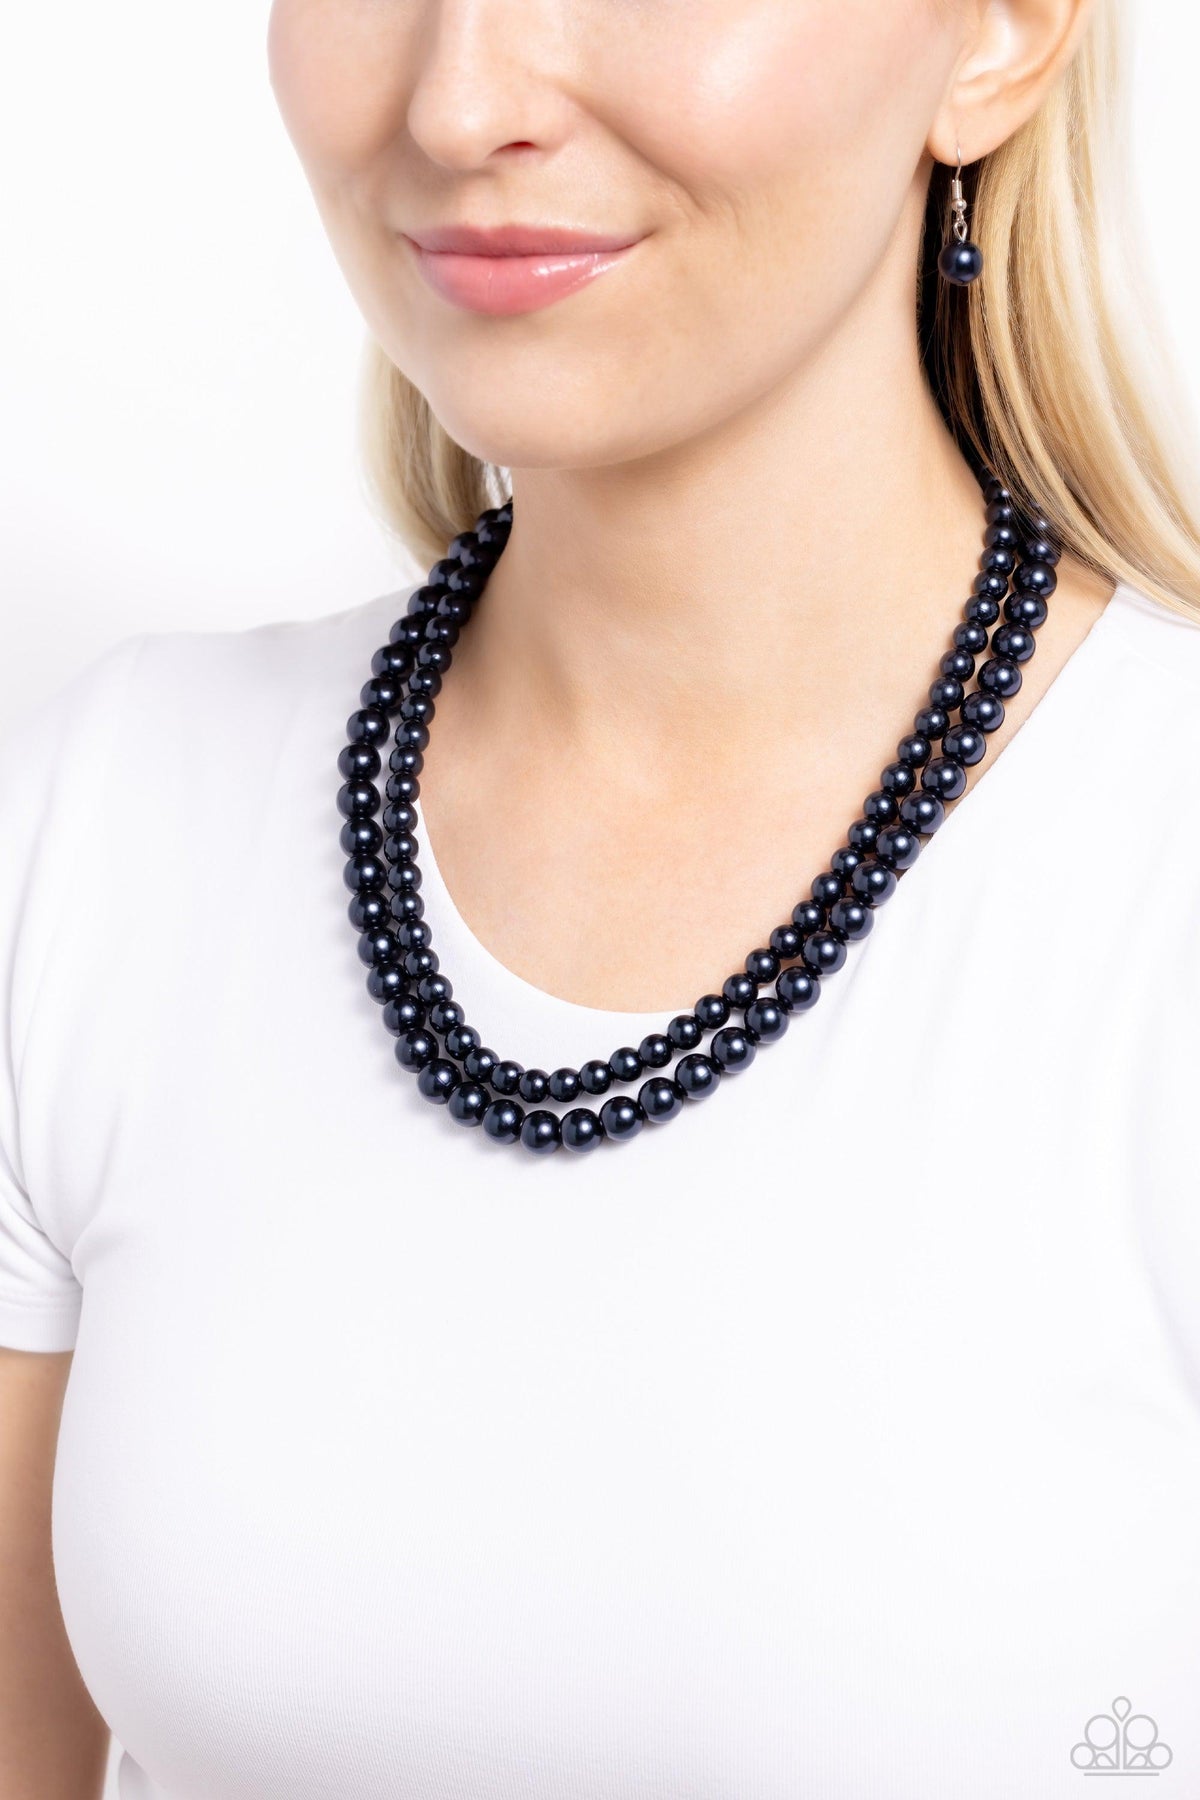 Woman Of The Century Blue Pearl Necklace - Paparazzi Accessories-on model - CarasShop.com - $5 Jewelry by Cara Jewels